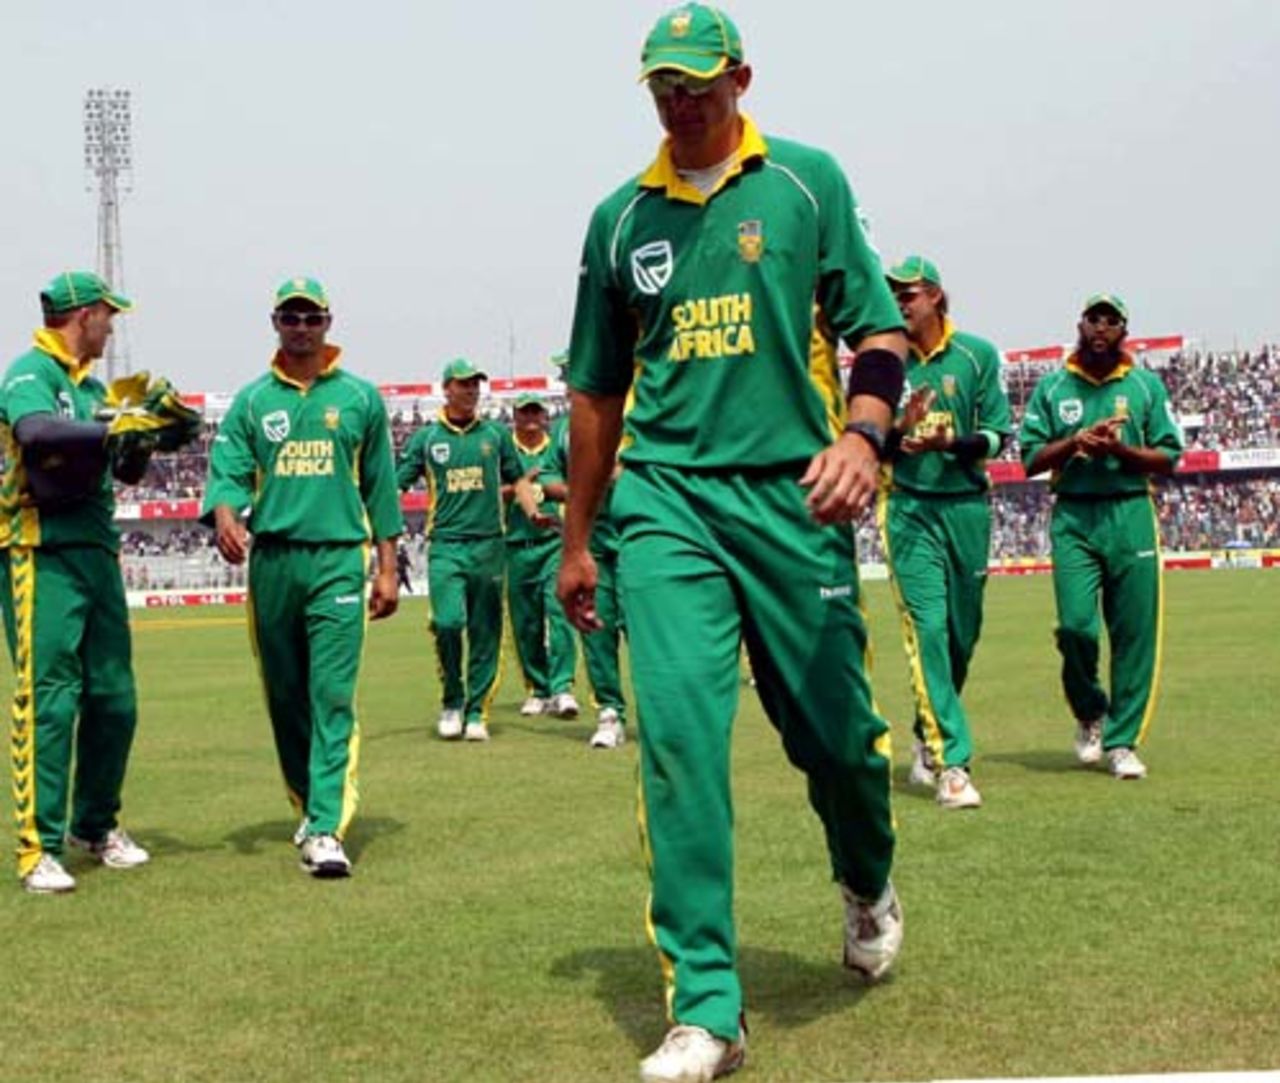 Andre Nel leads the team off the field, Bangladesh v South Africa, 2nd ODI, Mirpur, March 12, 2008